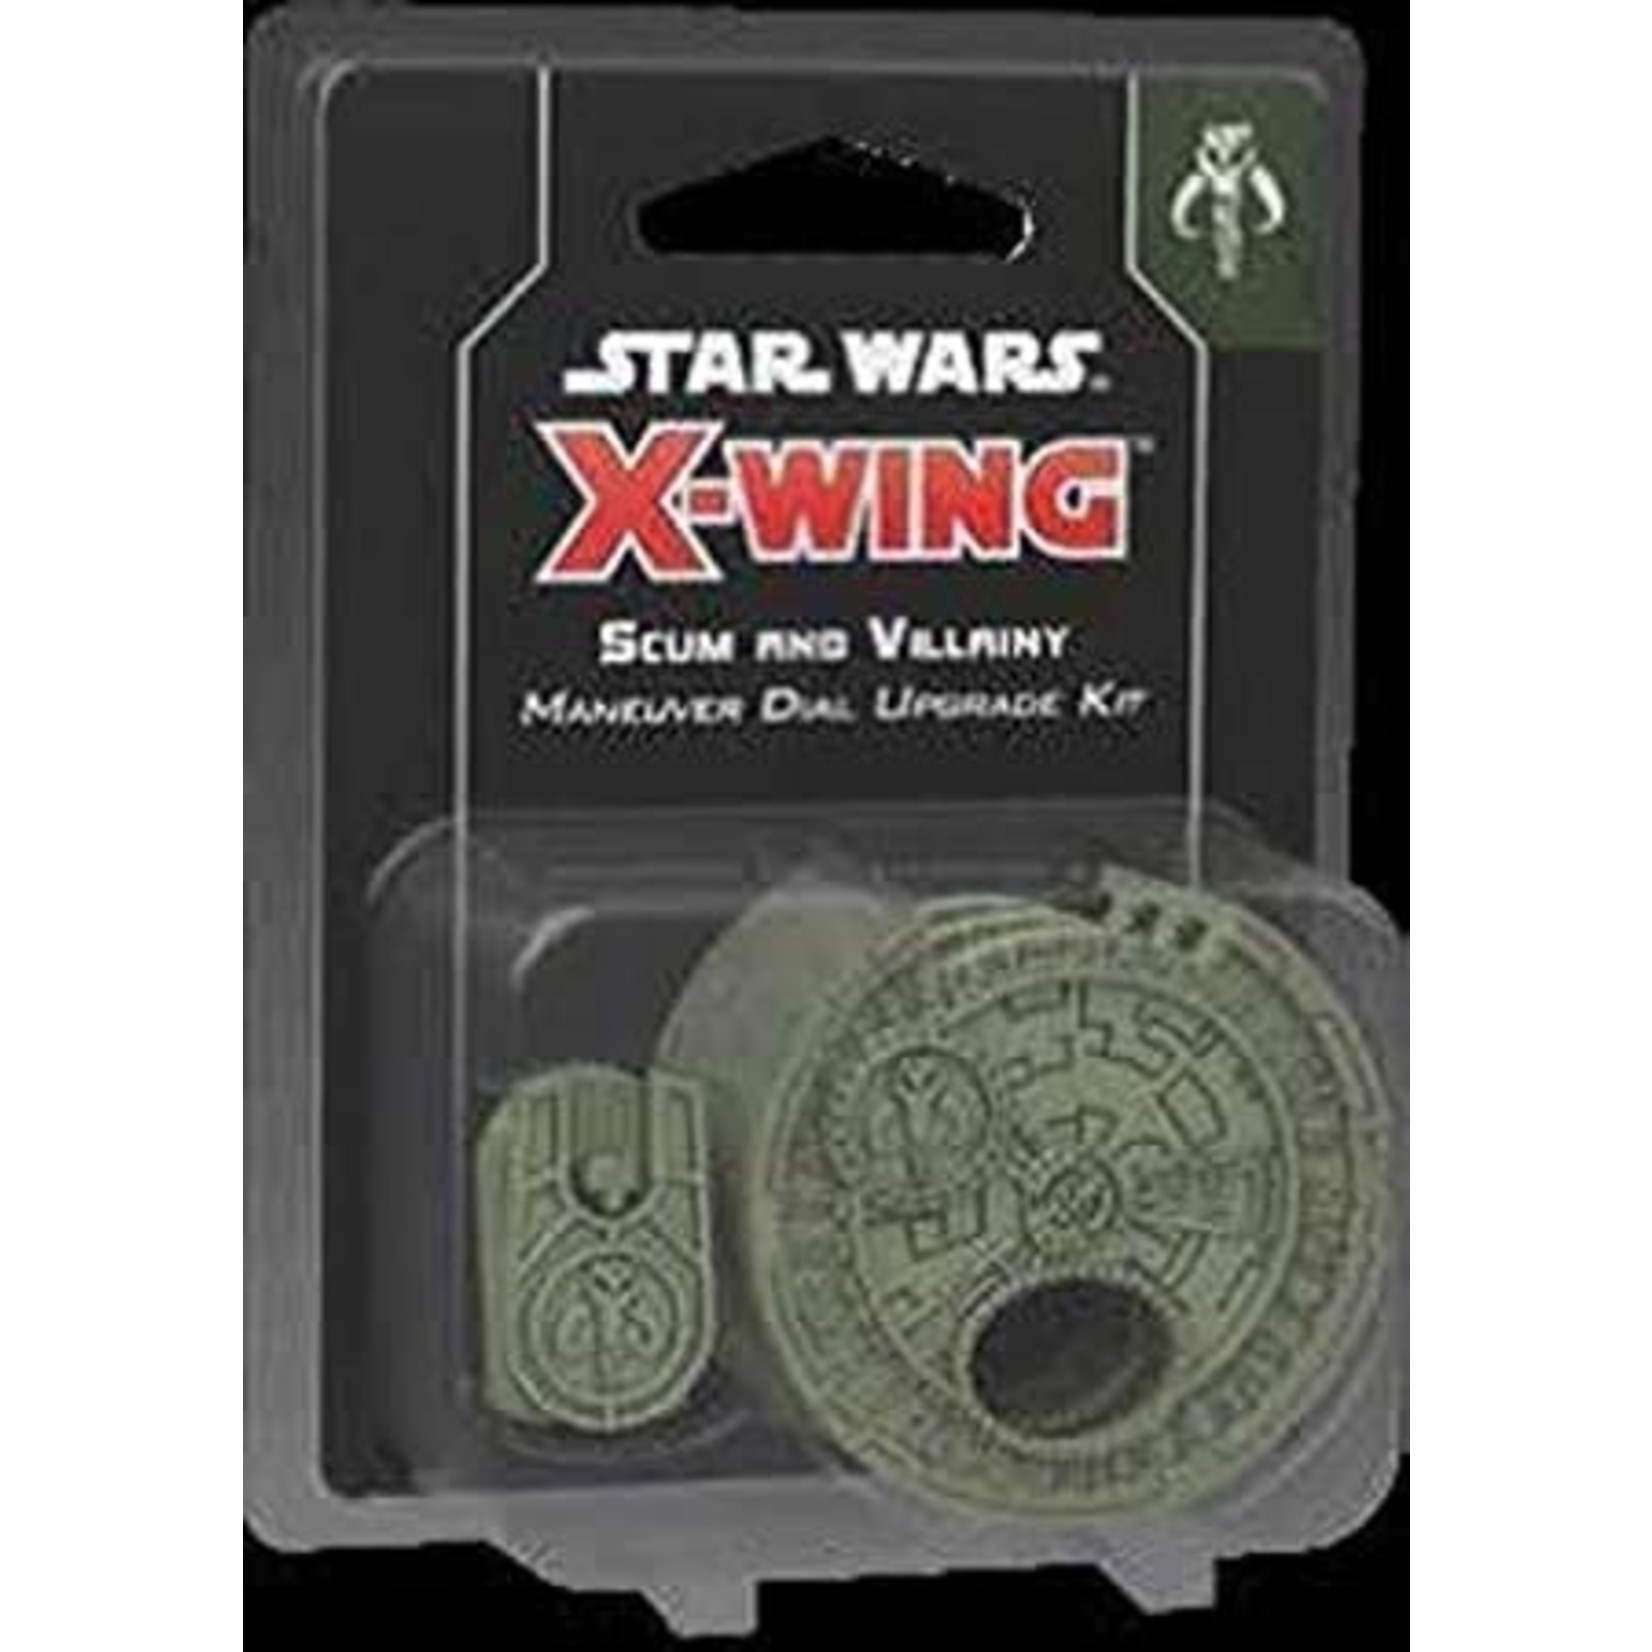 Star Wars X-Wing 2e: Scum and VIllainy Manuever Dial